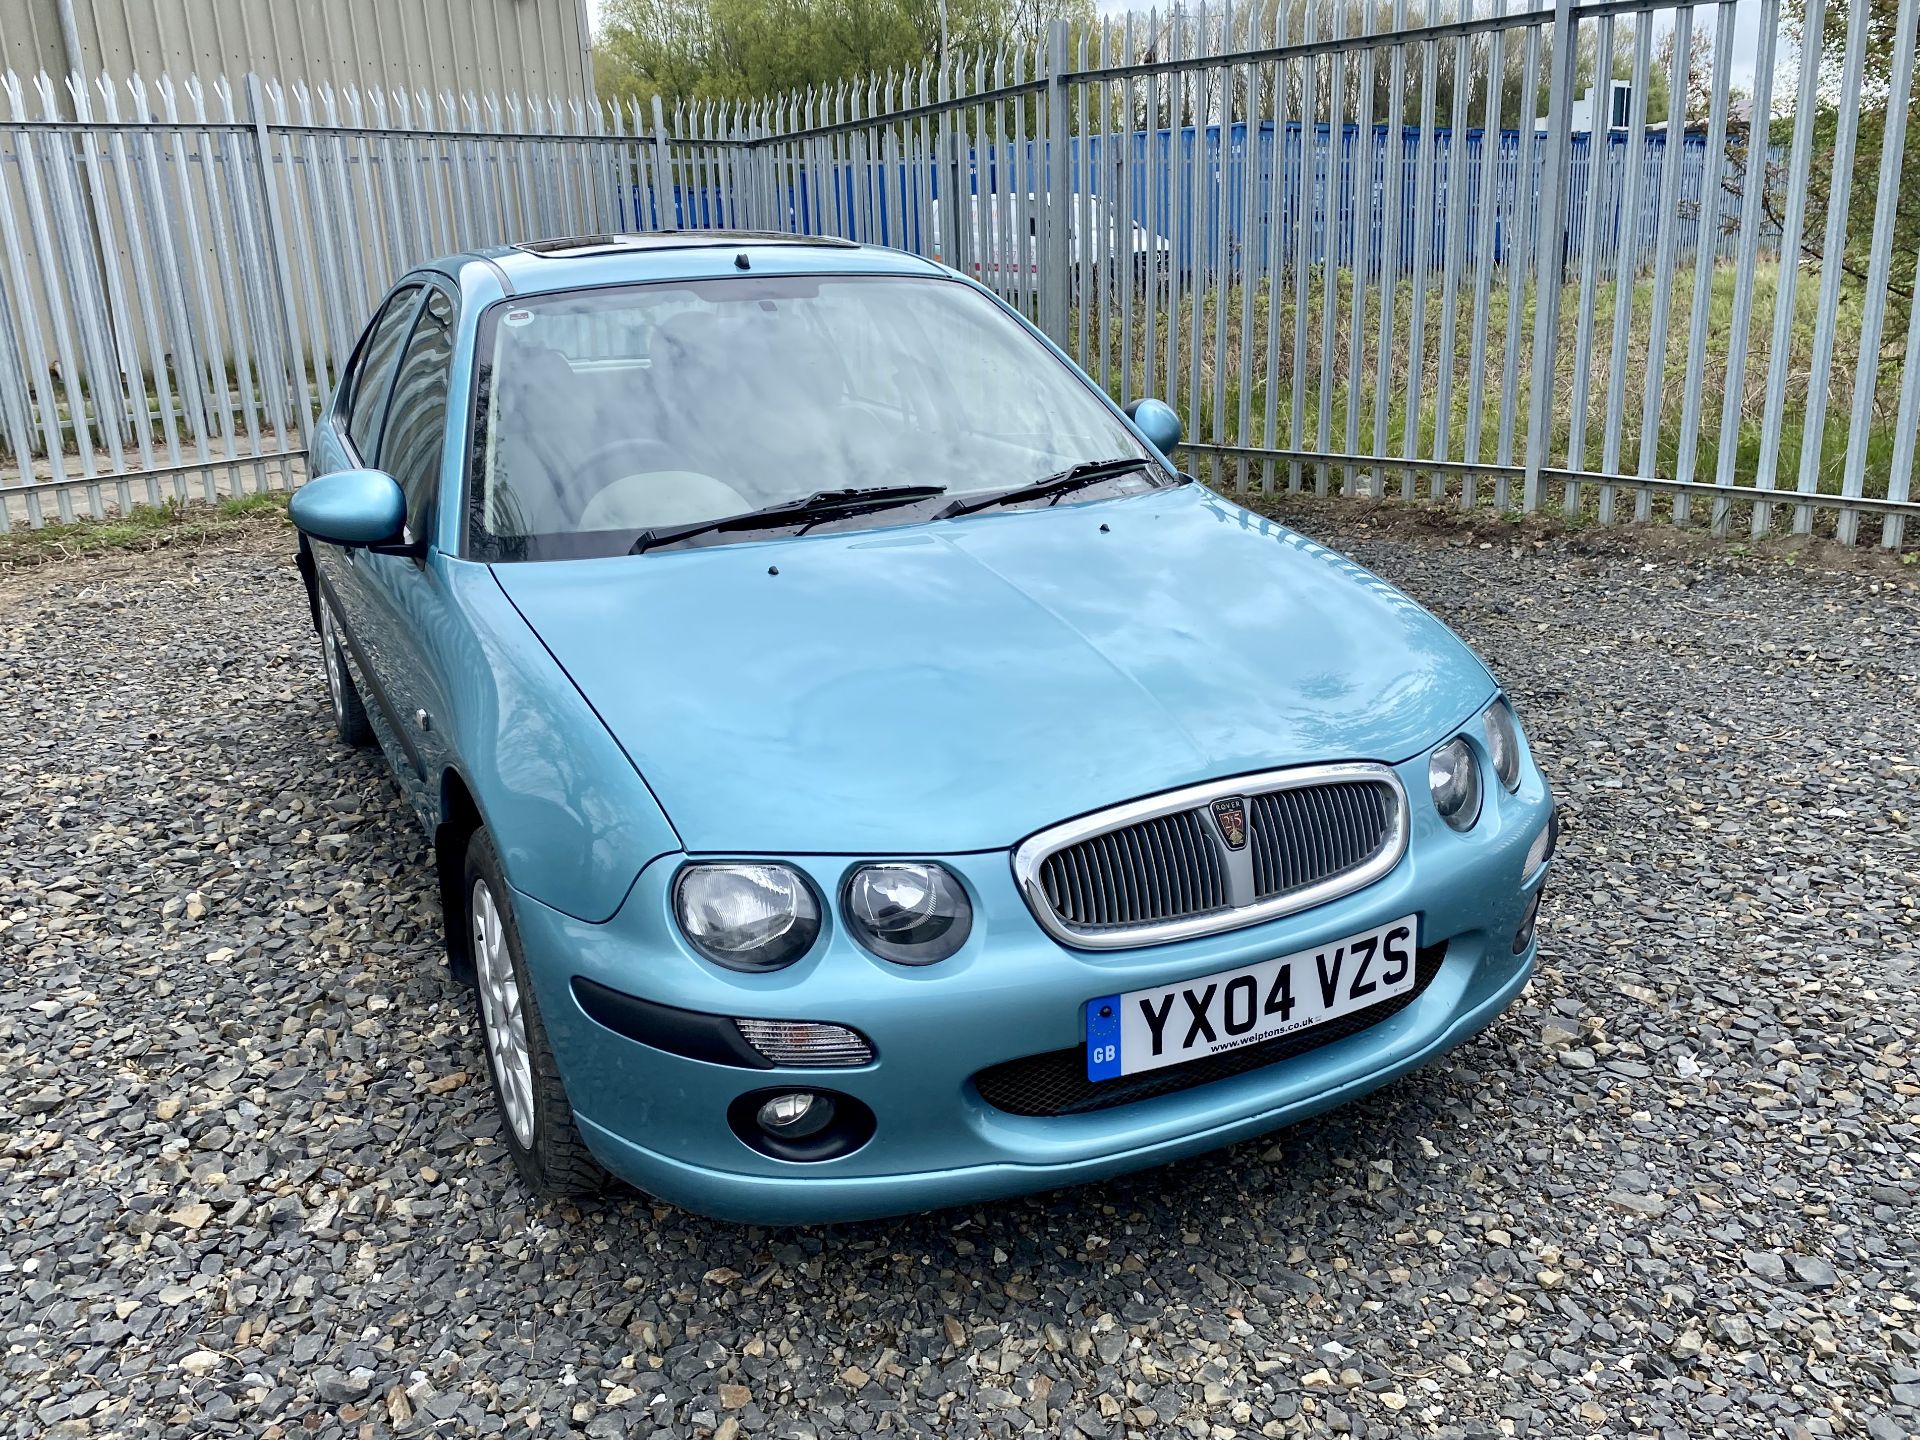 Rover 25 - Image 13 of 36